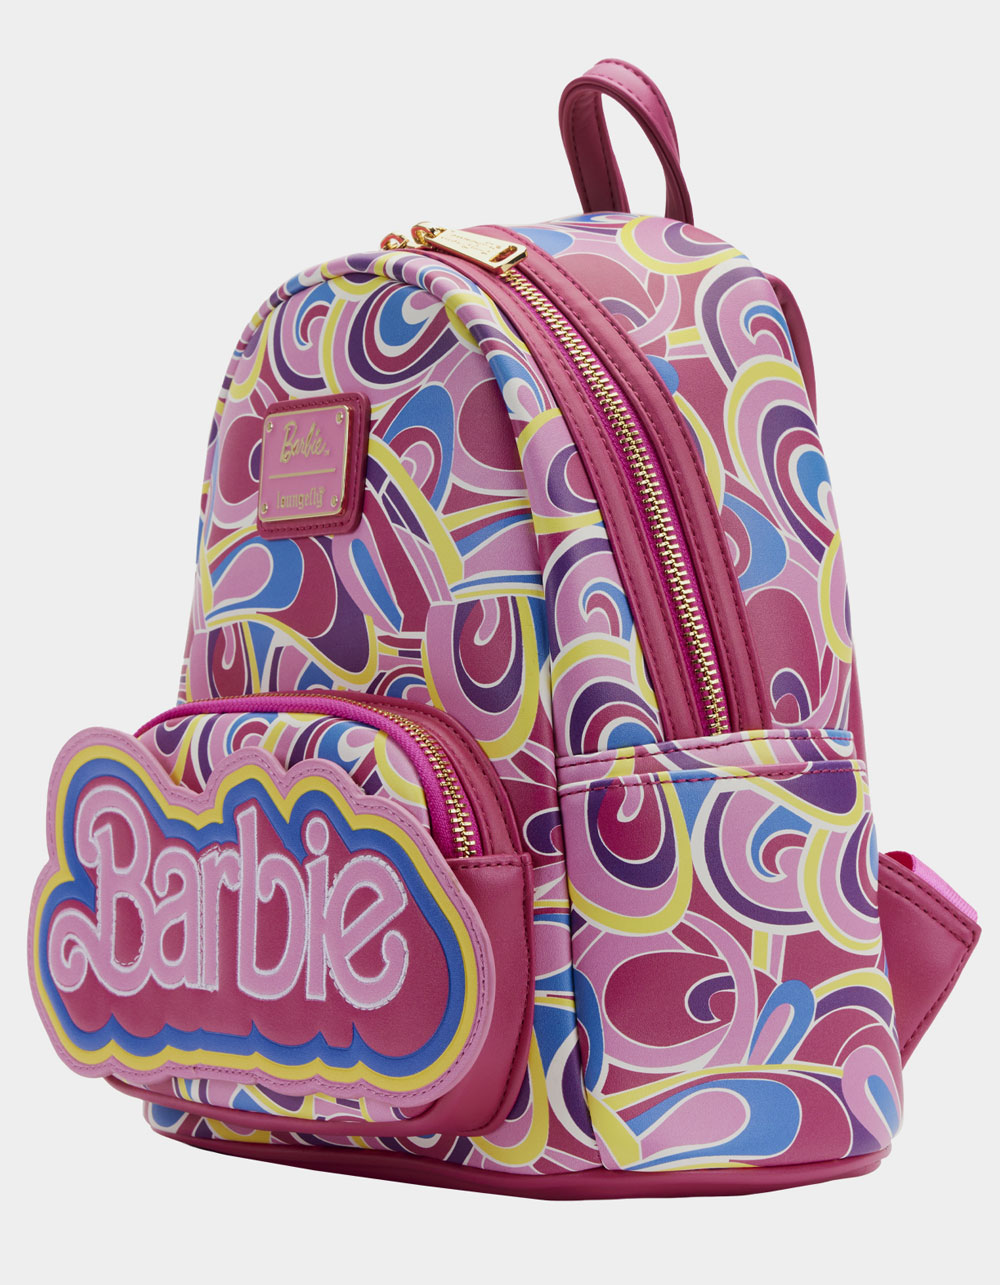 Barbie Loungefly Mini Backpack - Totally Hair 30th Anniversary